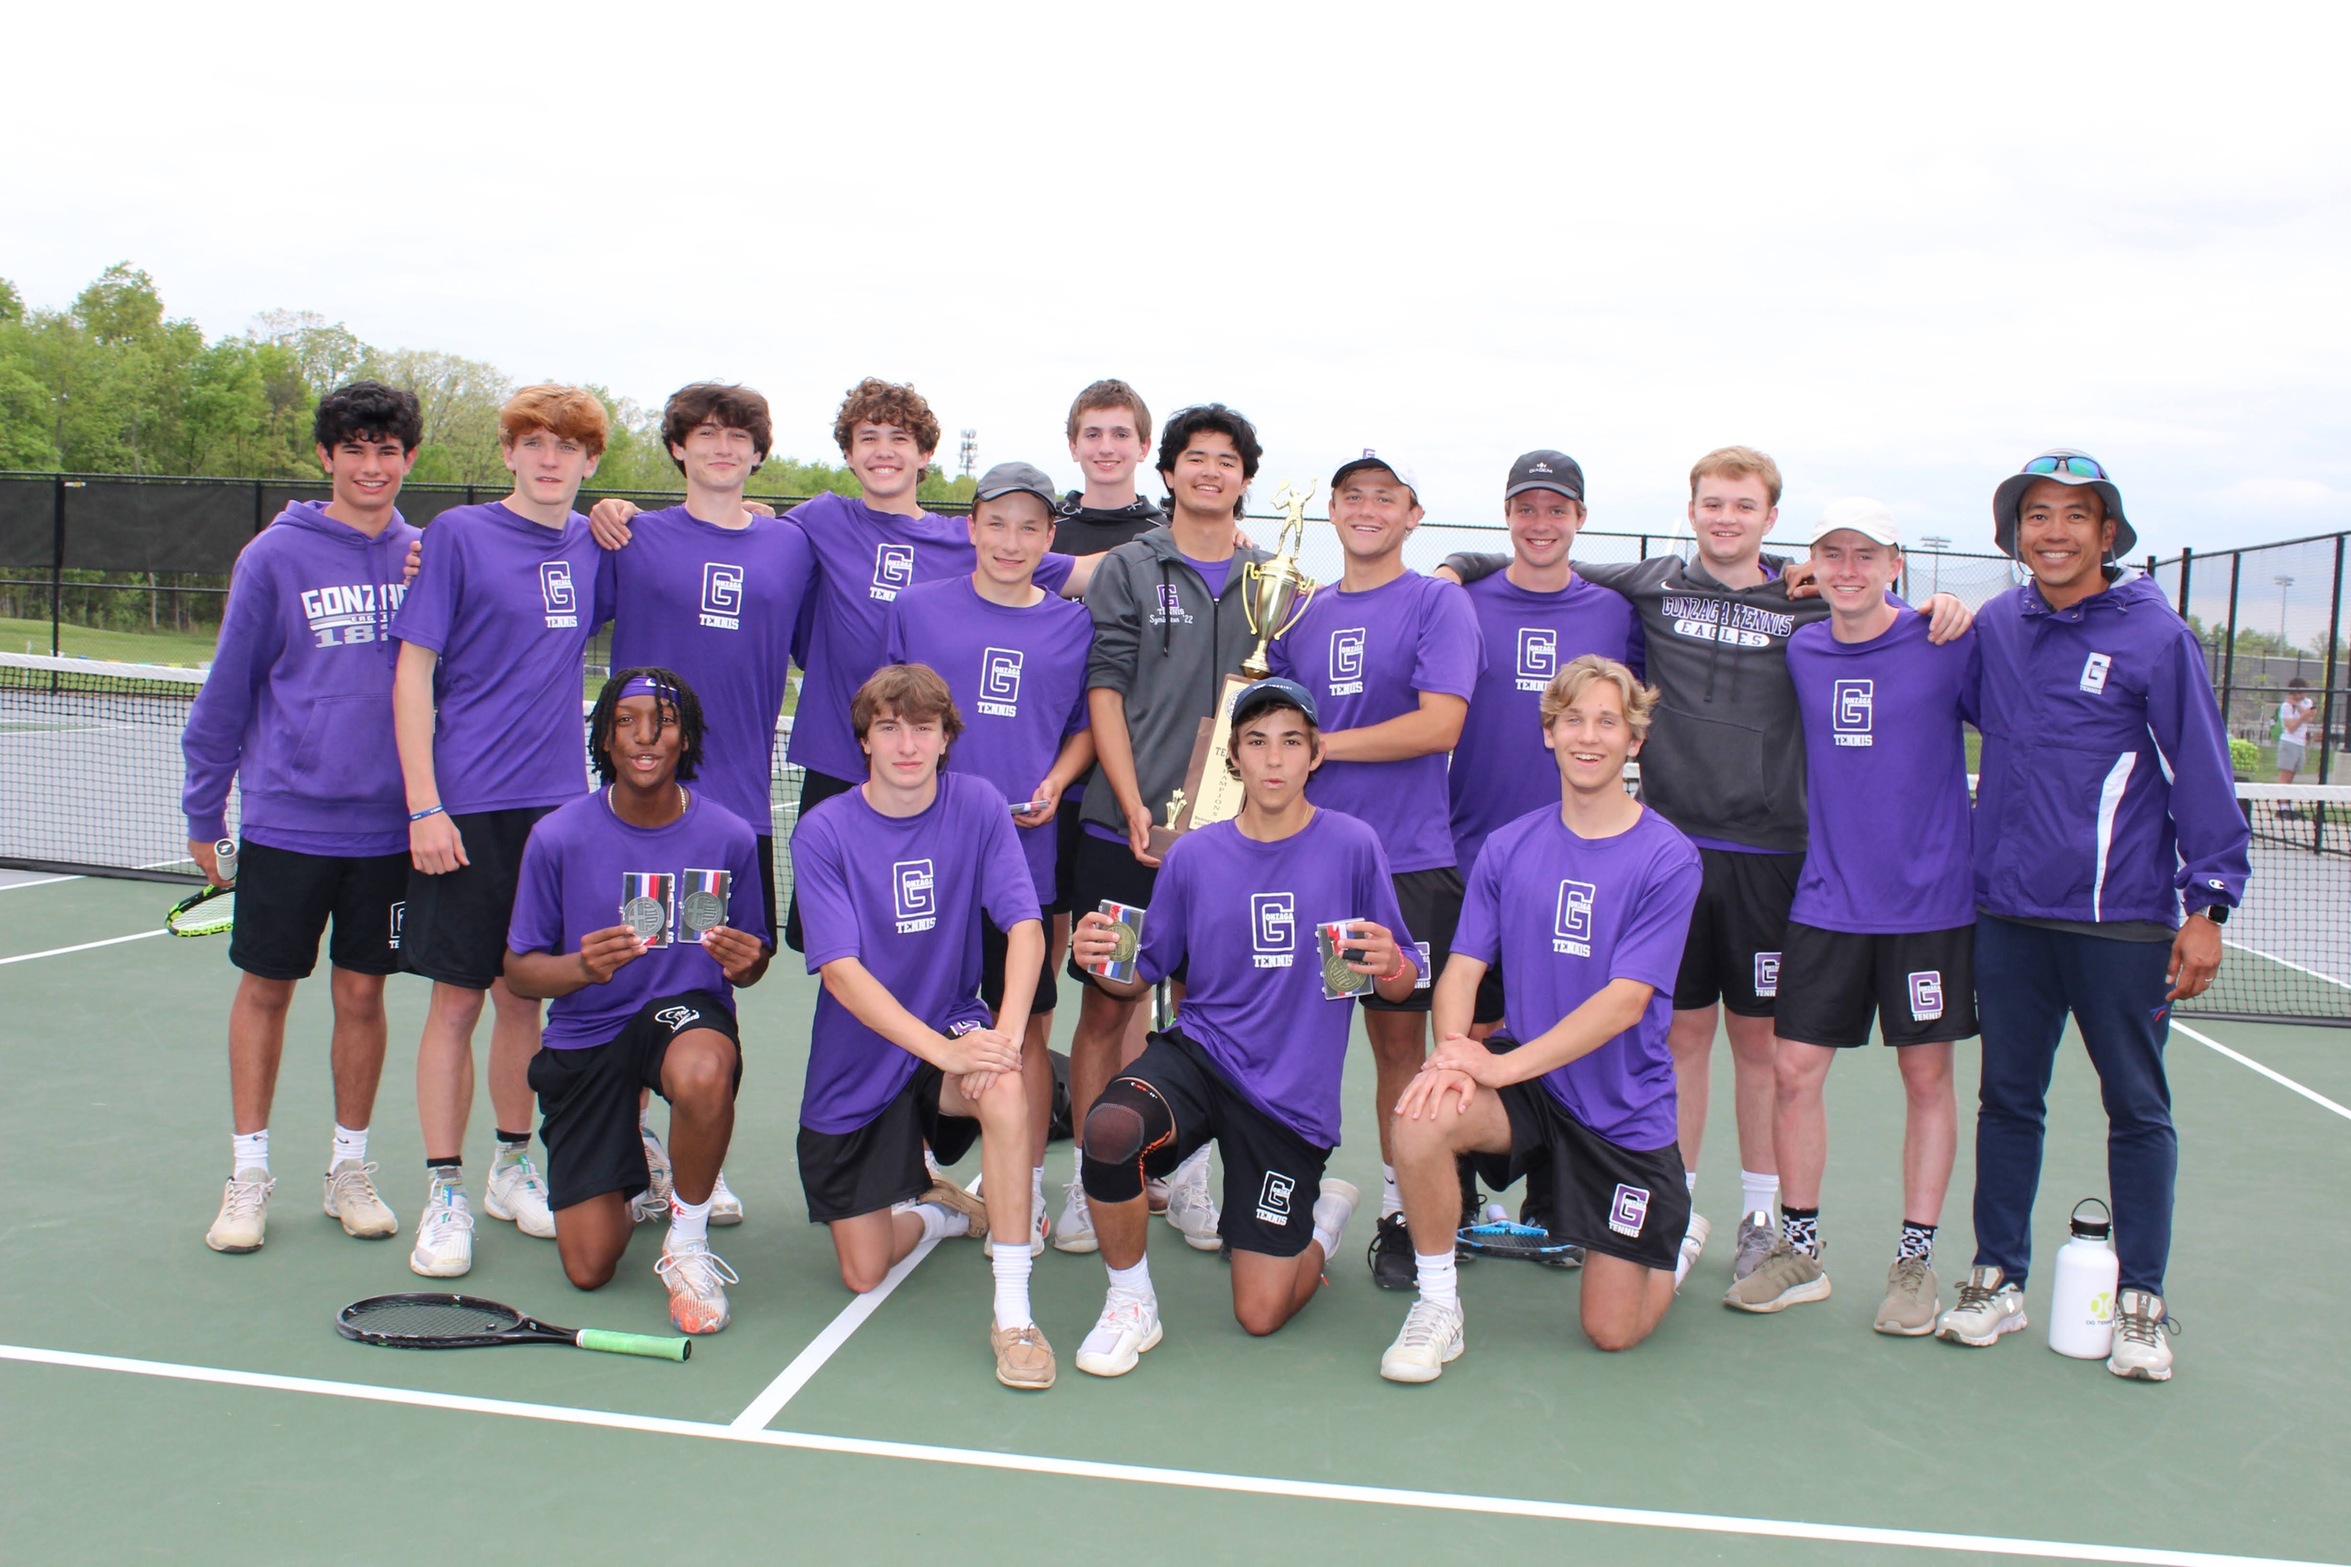 Gonzaga fights through nerves, claims WCAC team tennis title